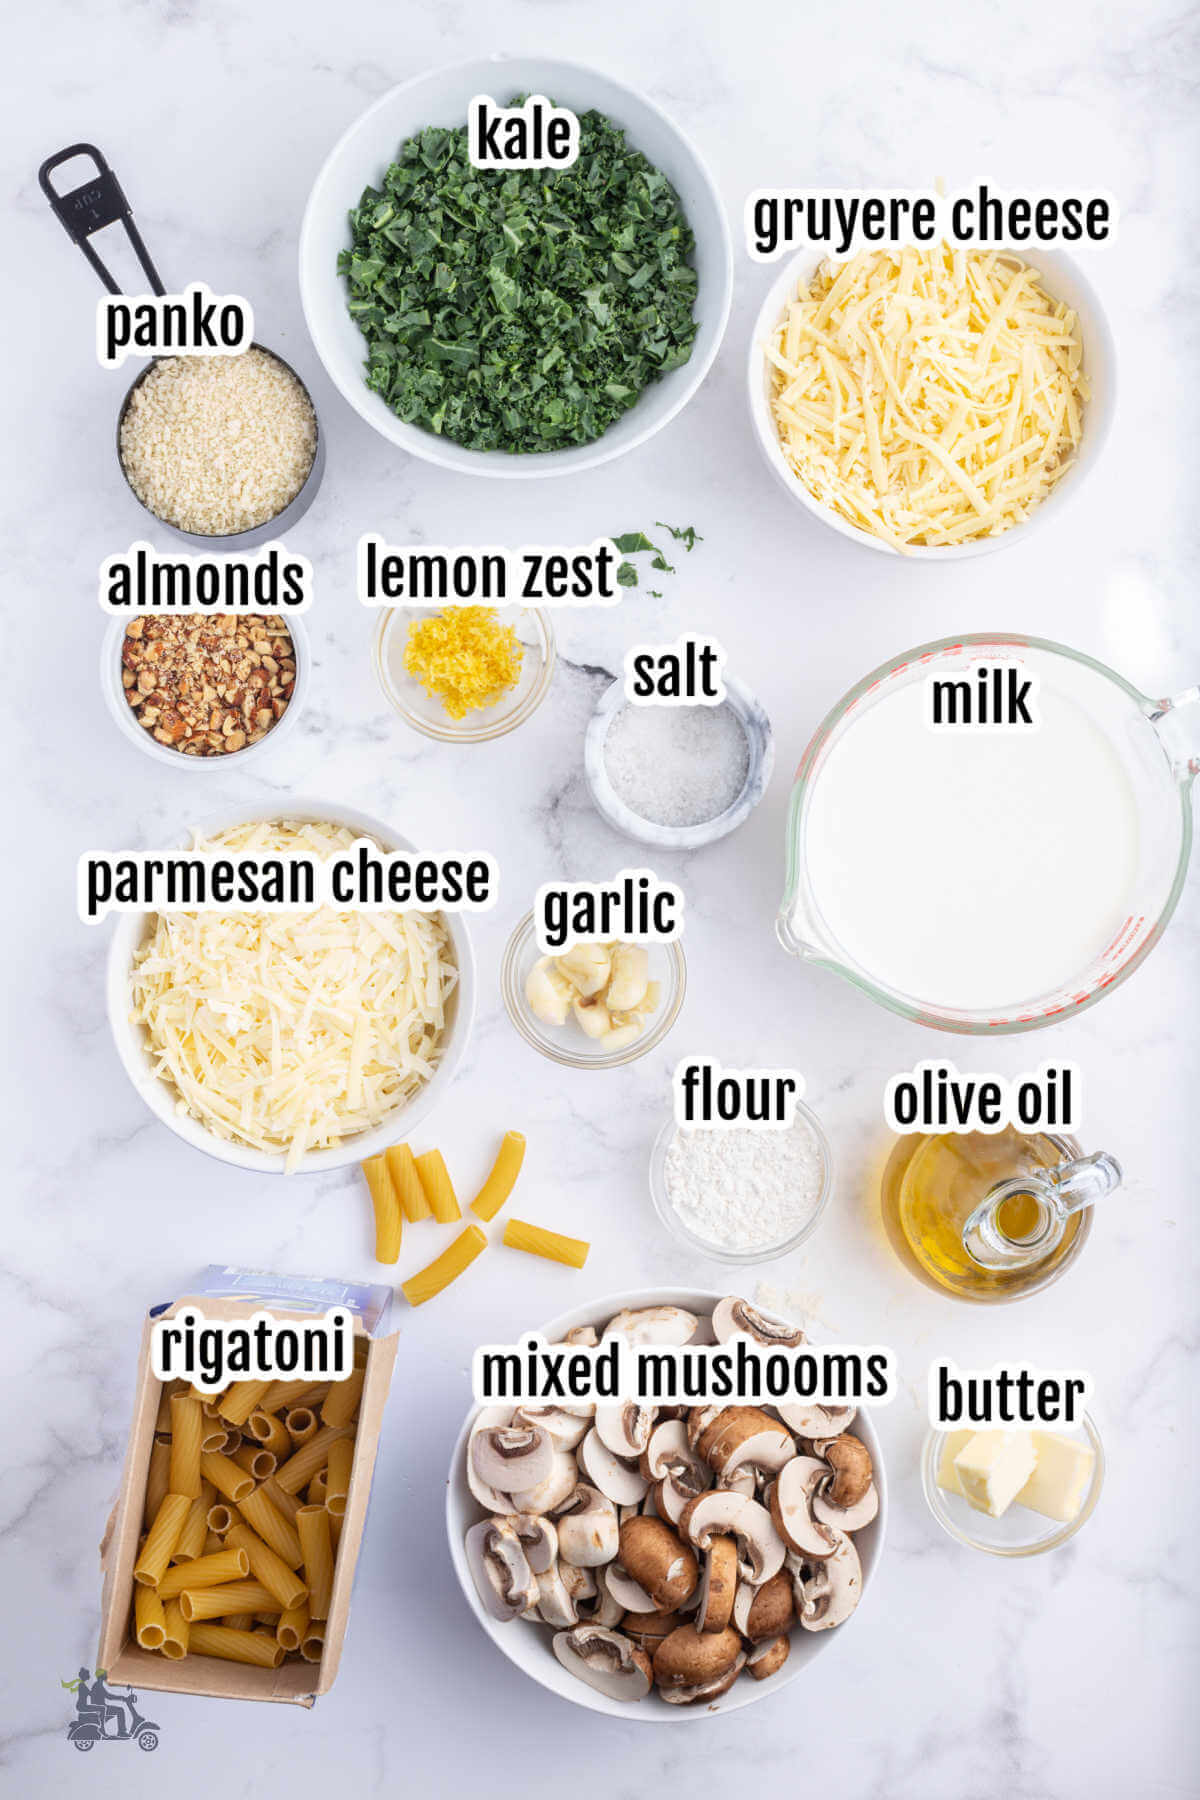 Image of the ingredients needed for the baked mushroom rigatoni with kale gremolata. 